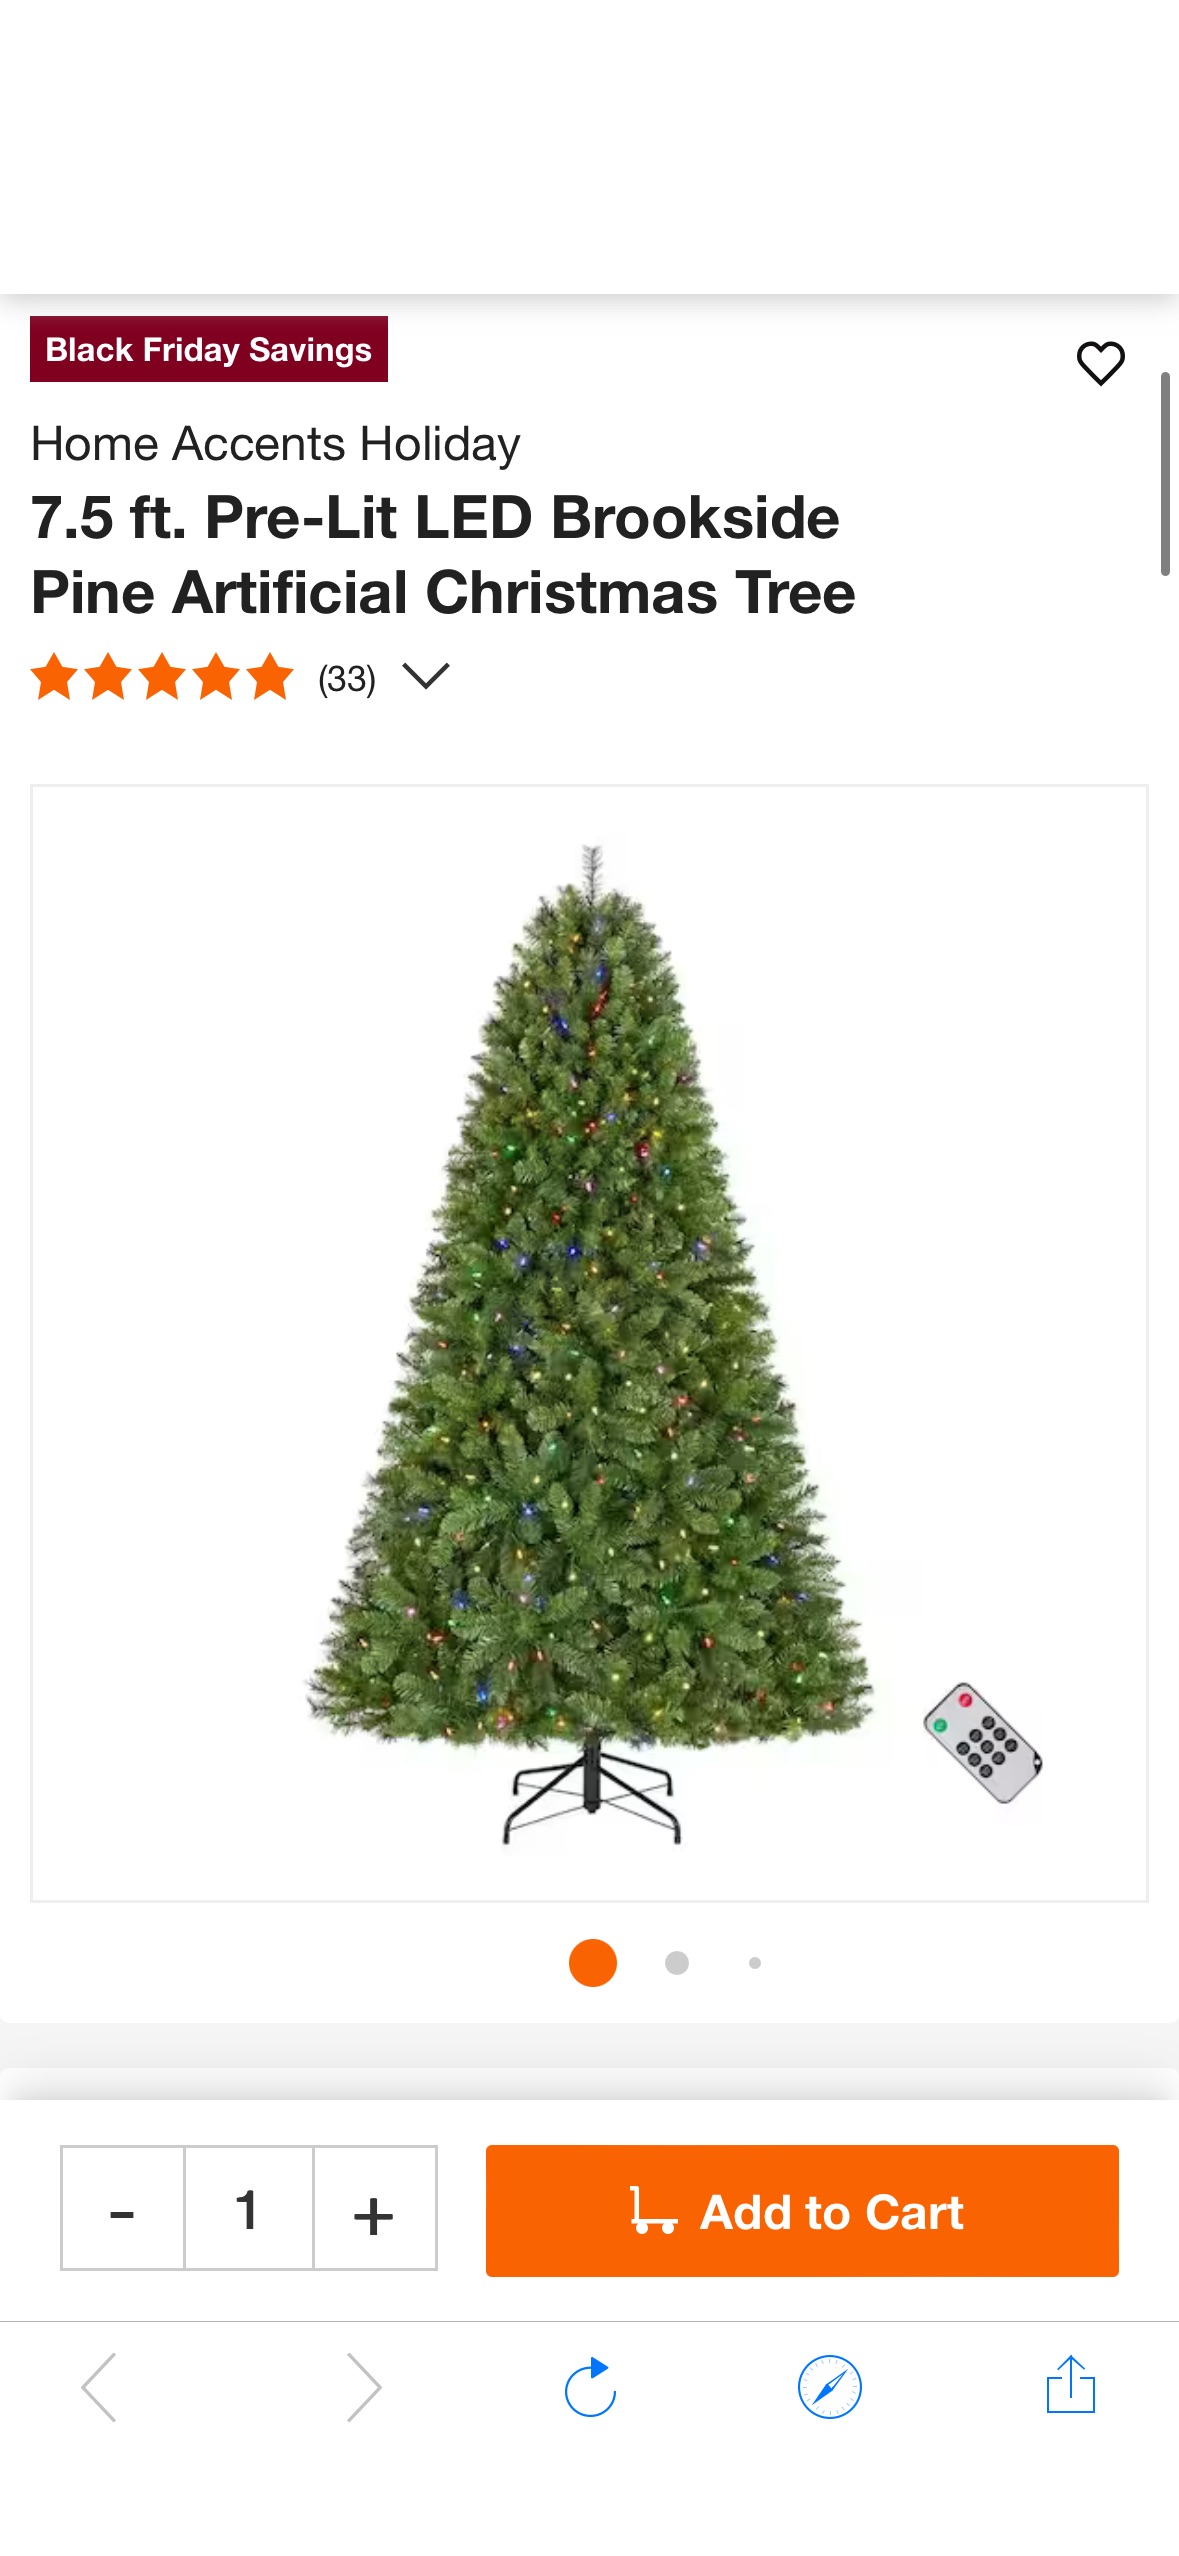 Home Accents Holiday 7.5 ft. Pre-Lit LED Brookside Pine Artificial Christmas Tree 23HD90002 - The Home Depot